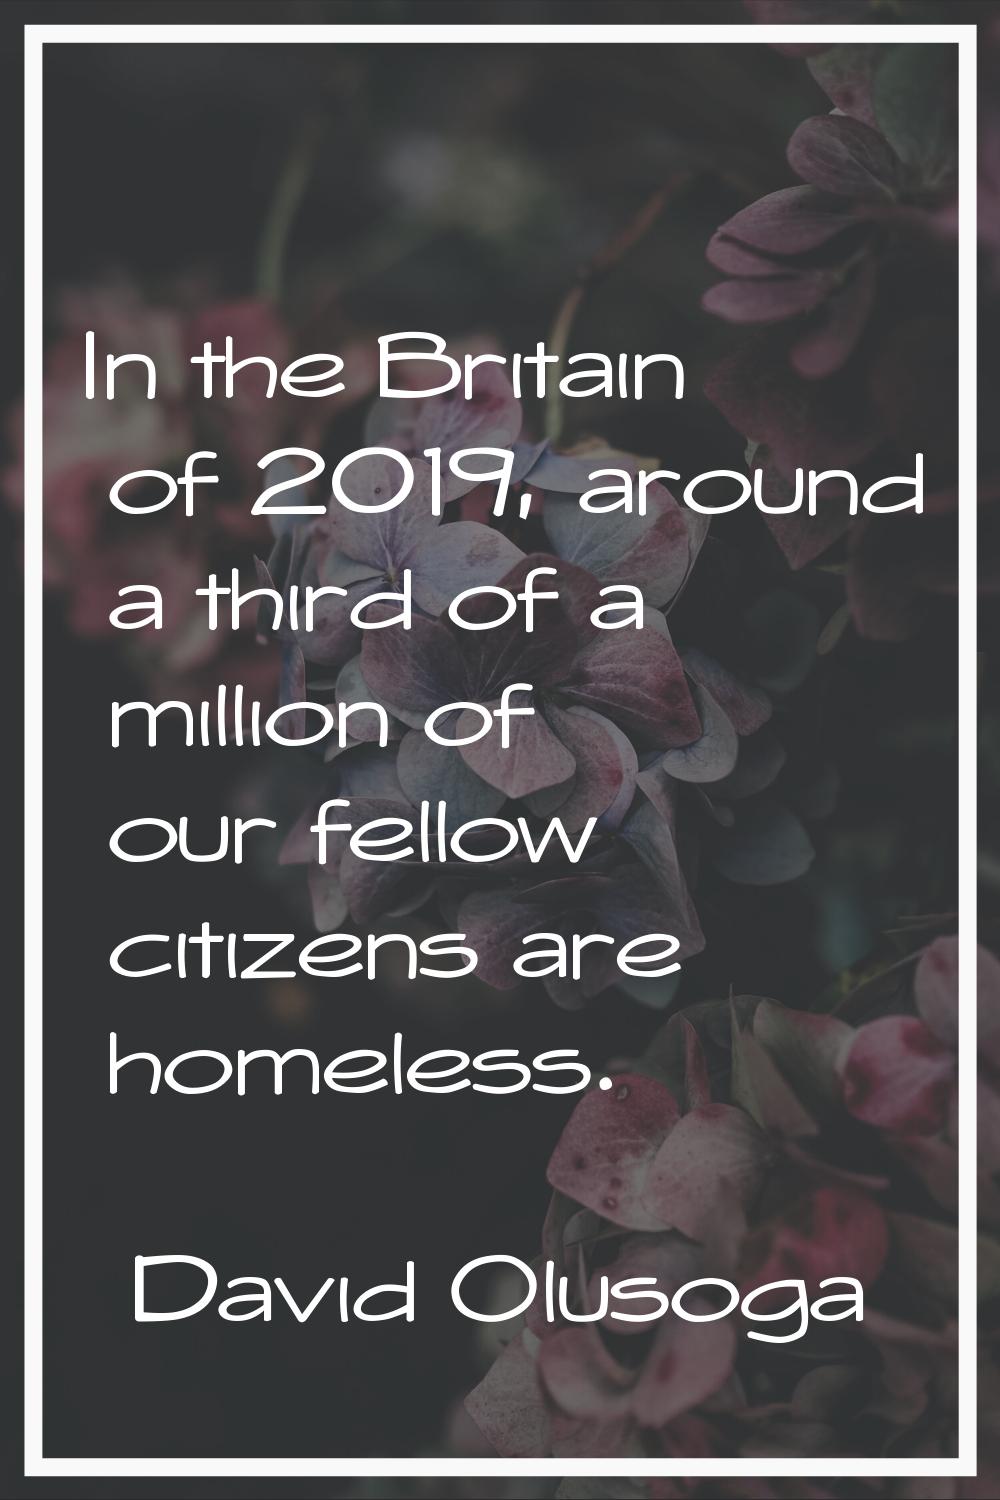 In the Britain of 2019, around a third of a million of our fellow citizens are homeless.